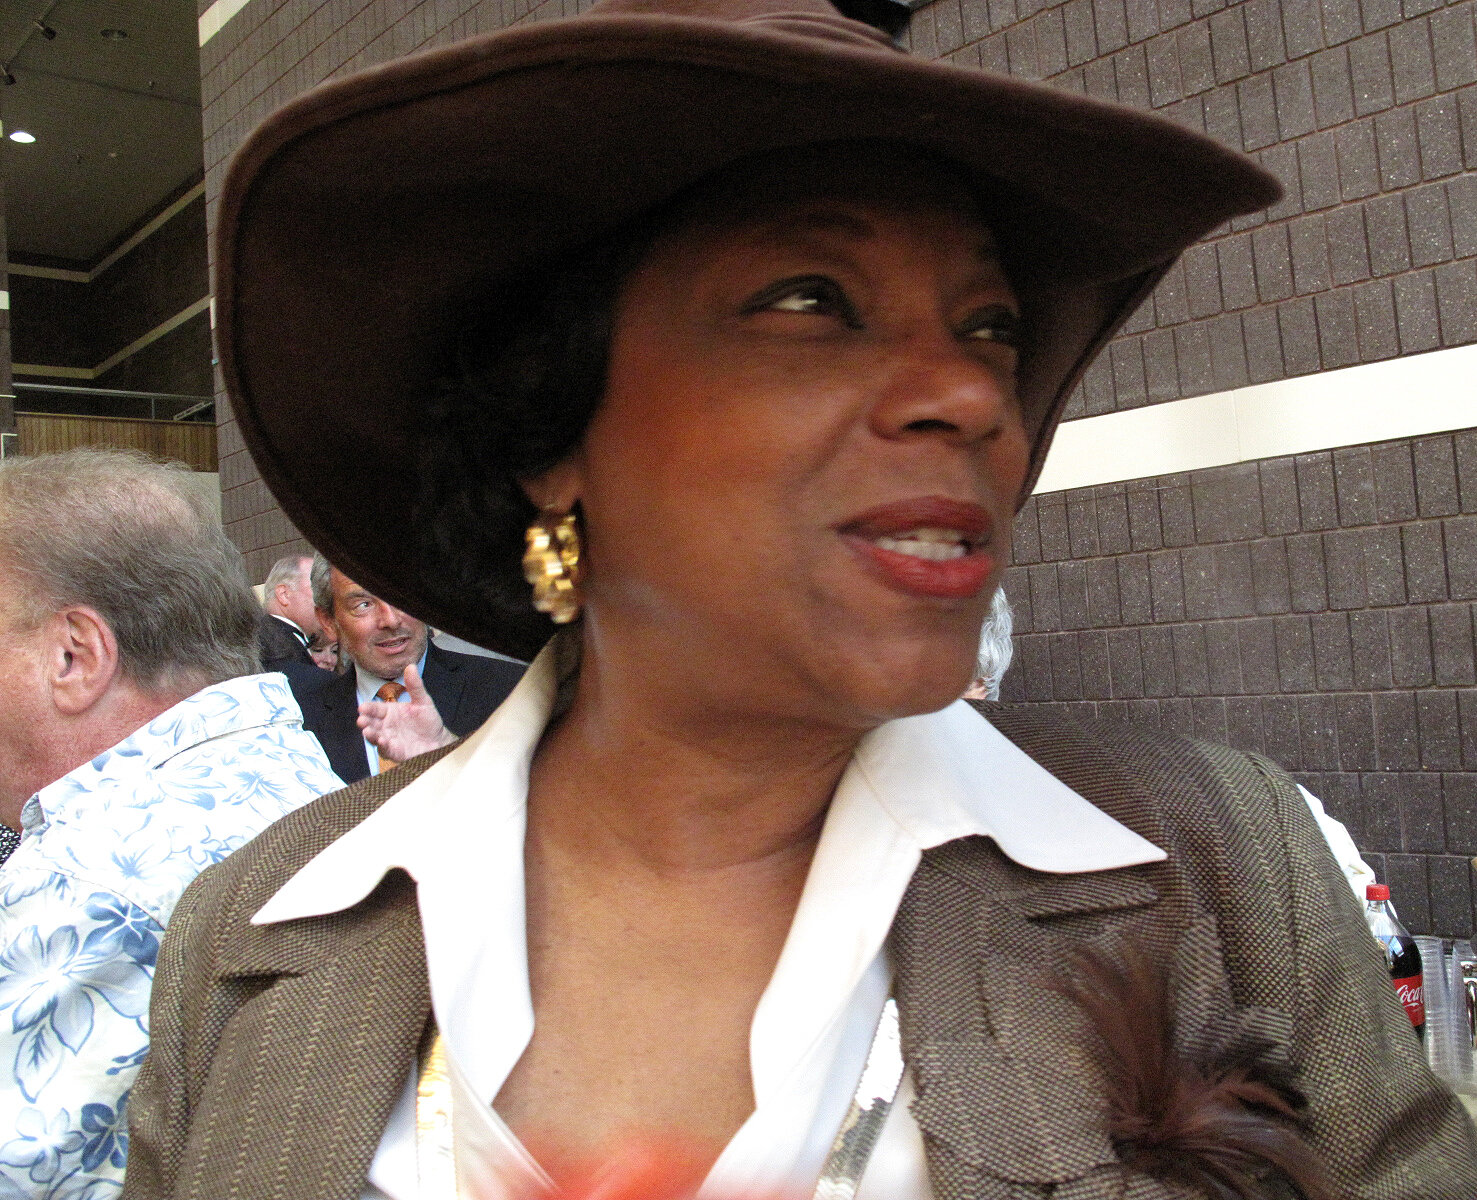 Constance Frazier, Suffern, NY, 2013